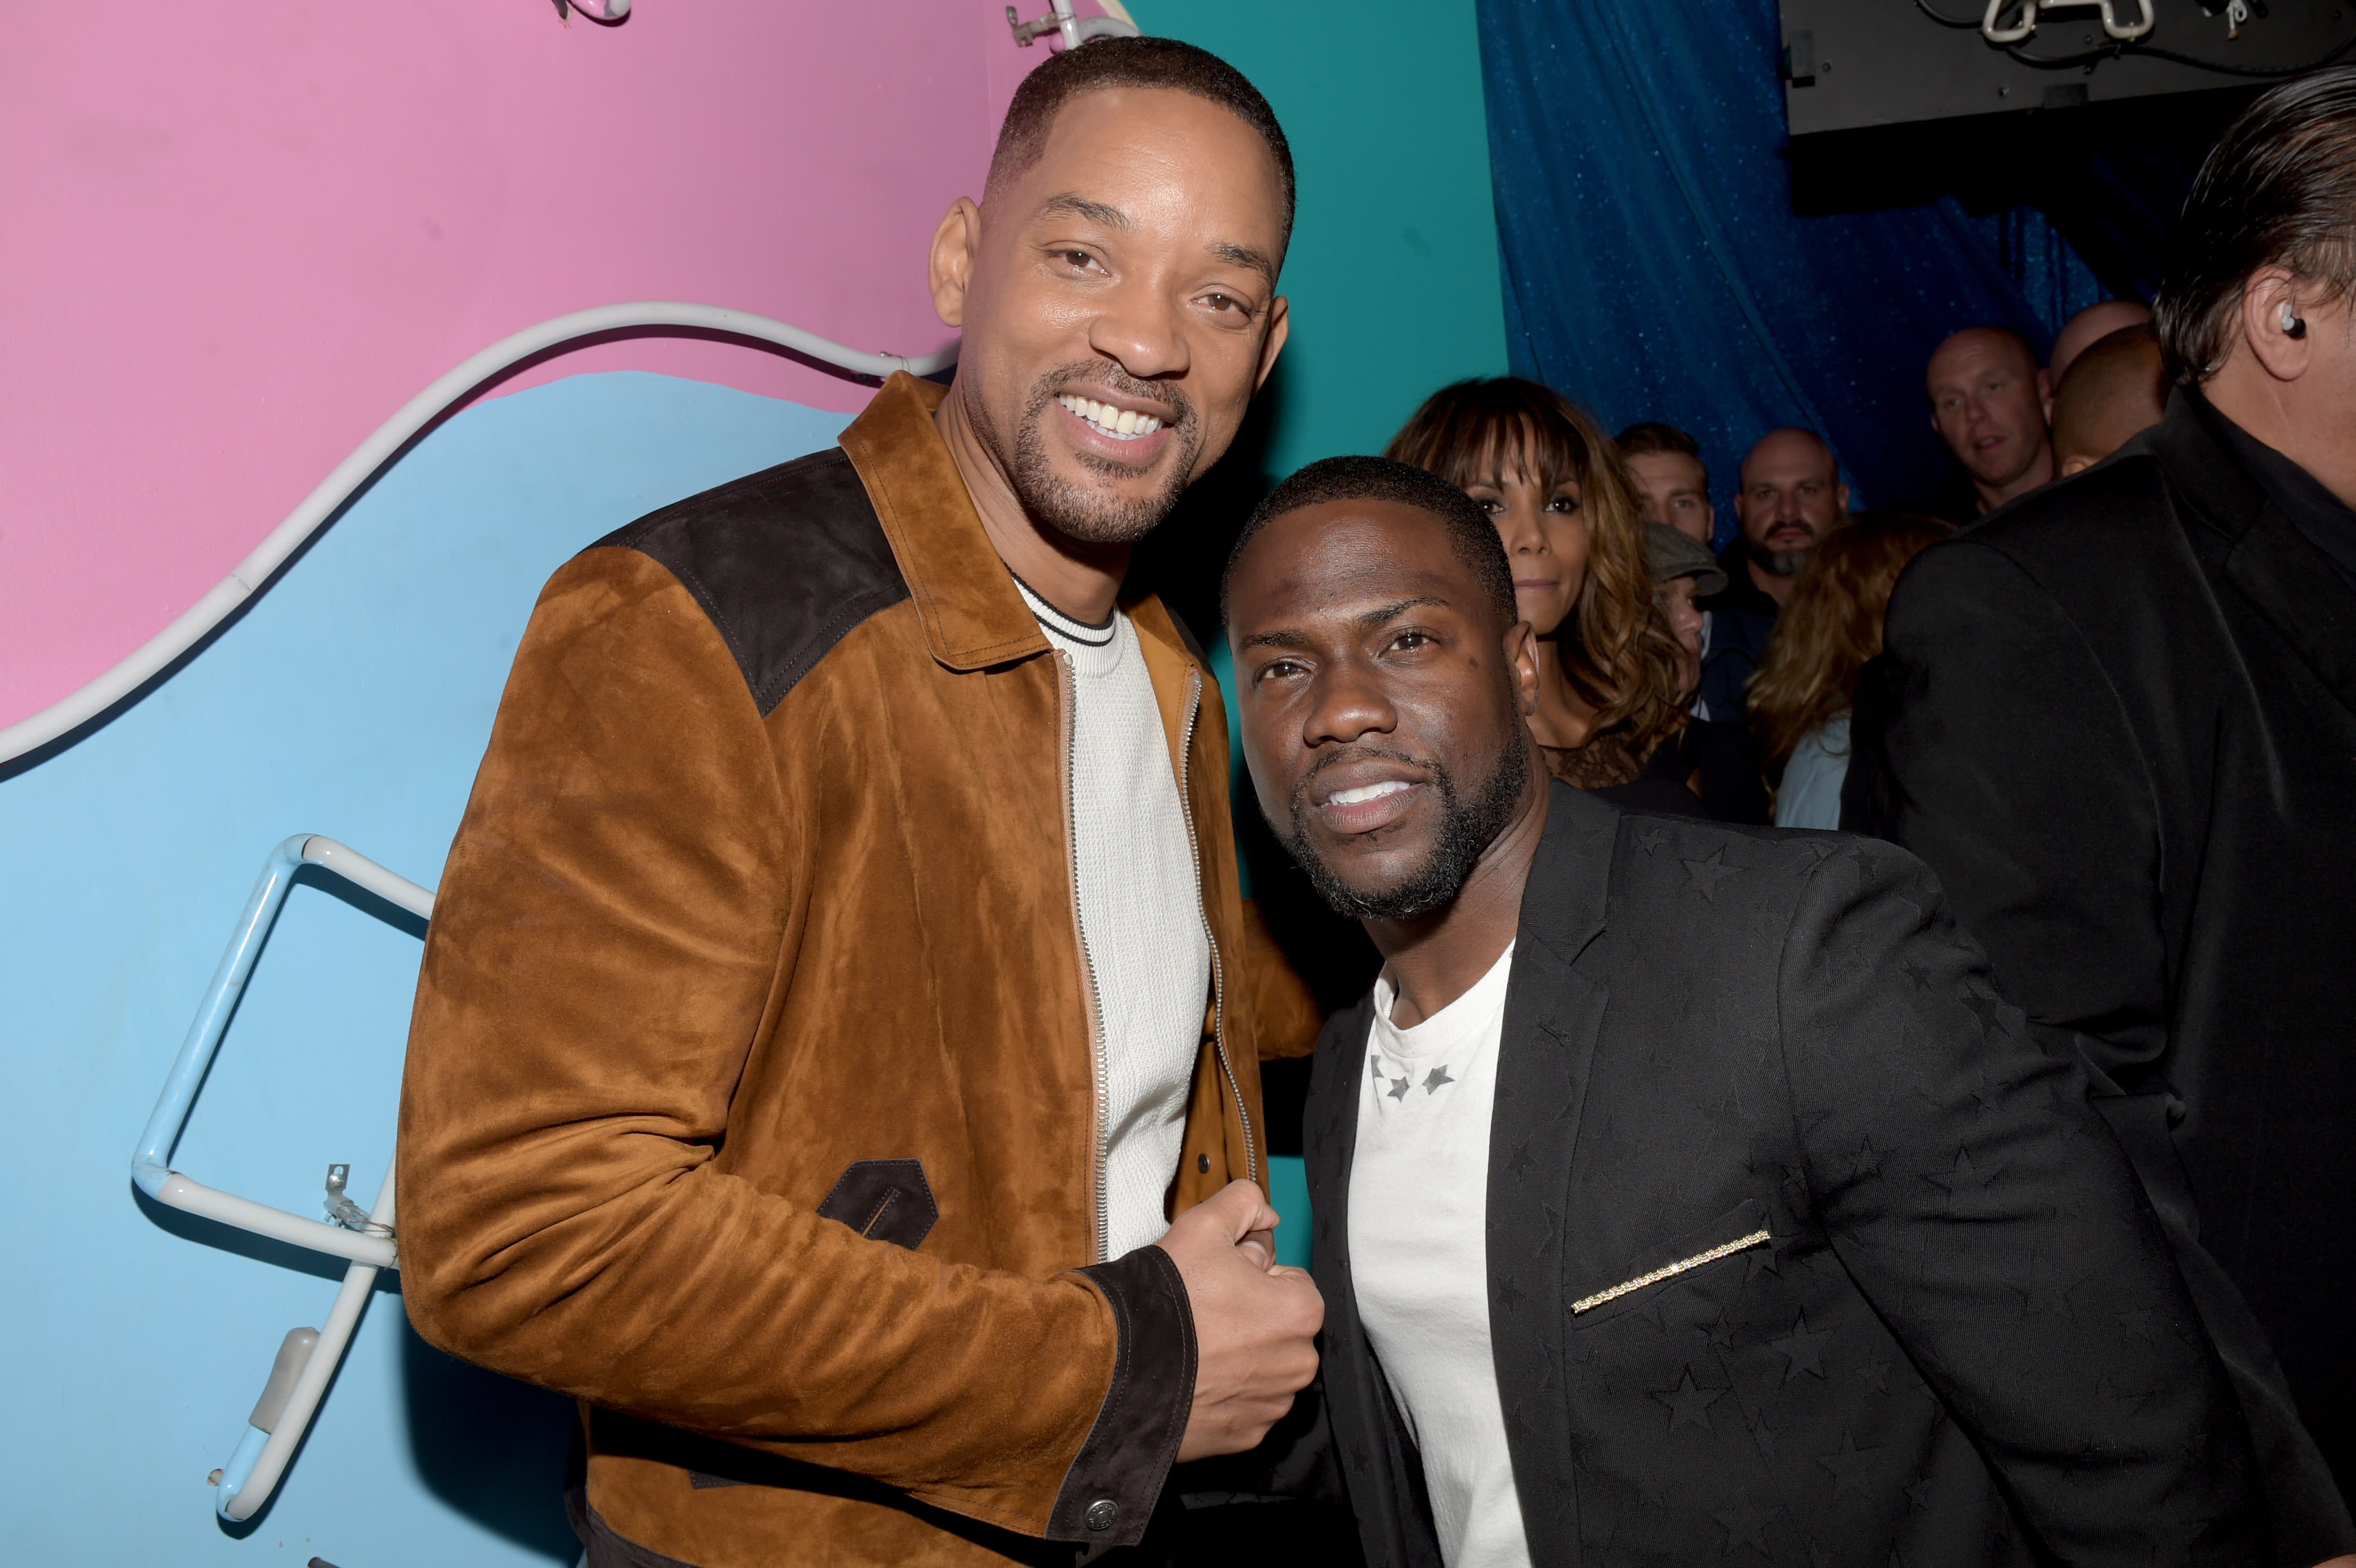 Will Smith, Kevin Hart, a16z back virtual events startup Run the World